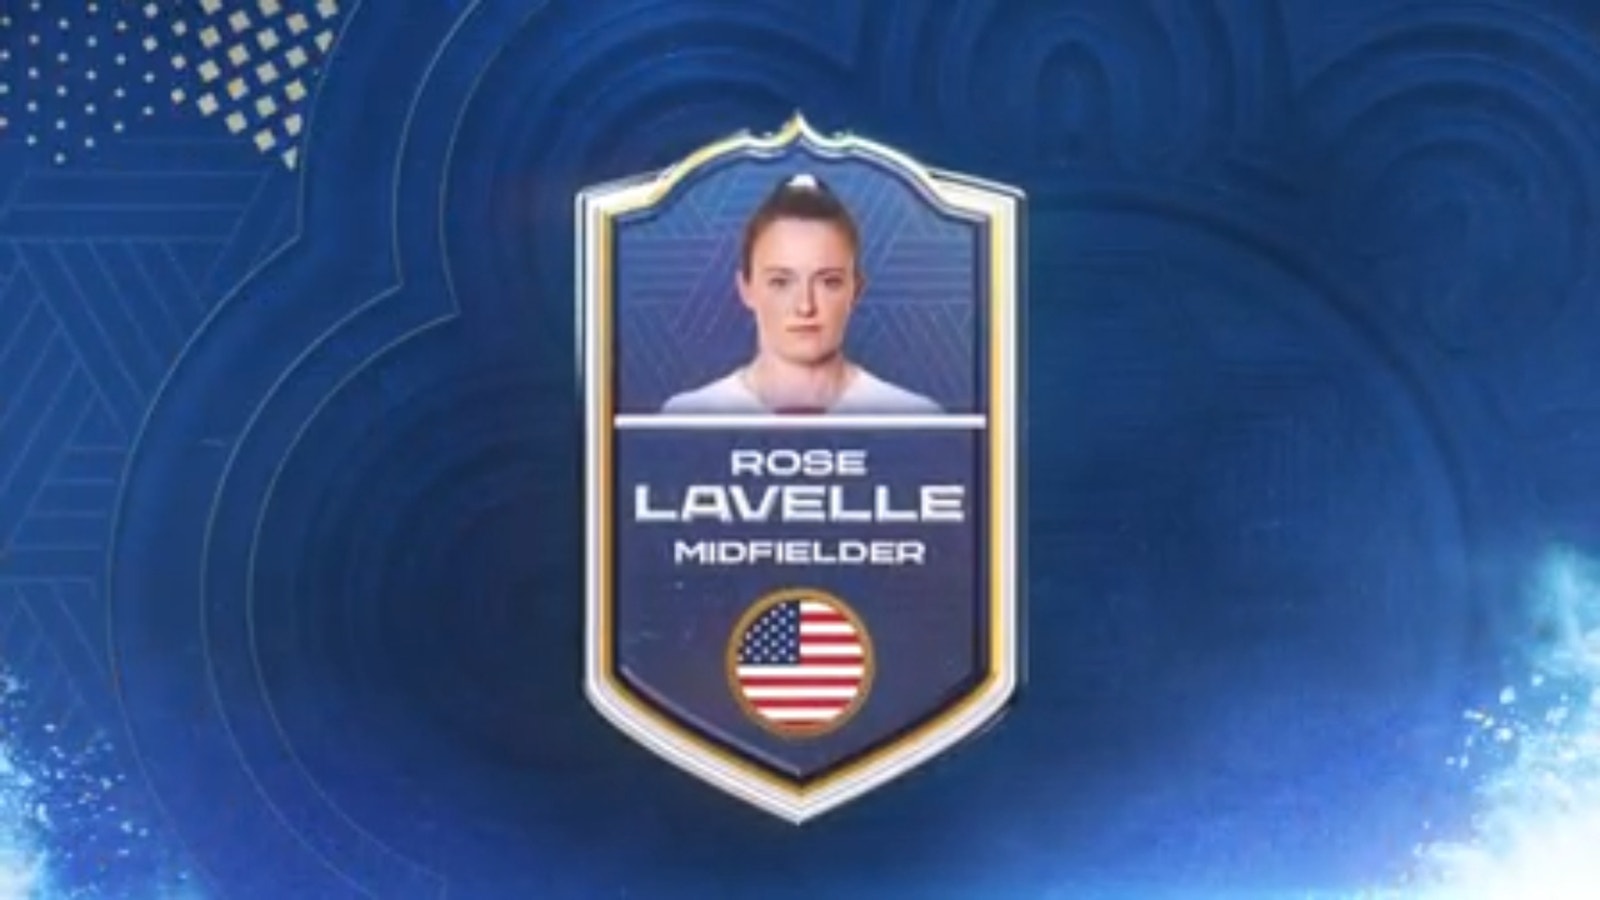 Rose Lavelle is ranked #9 on Aly Wagner's 25 Greatest Players list